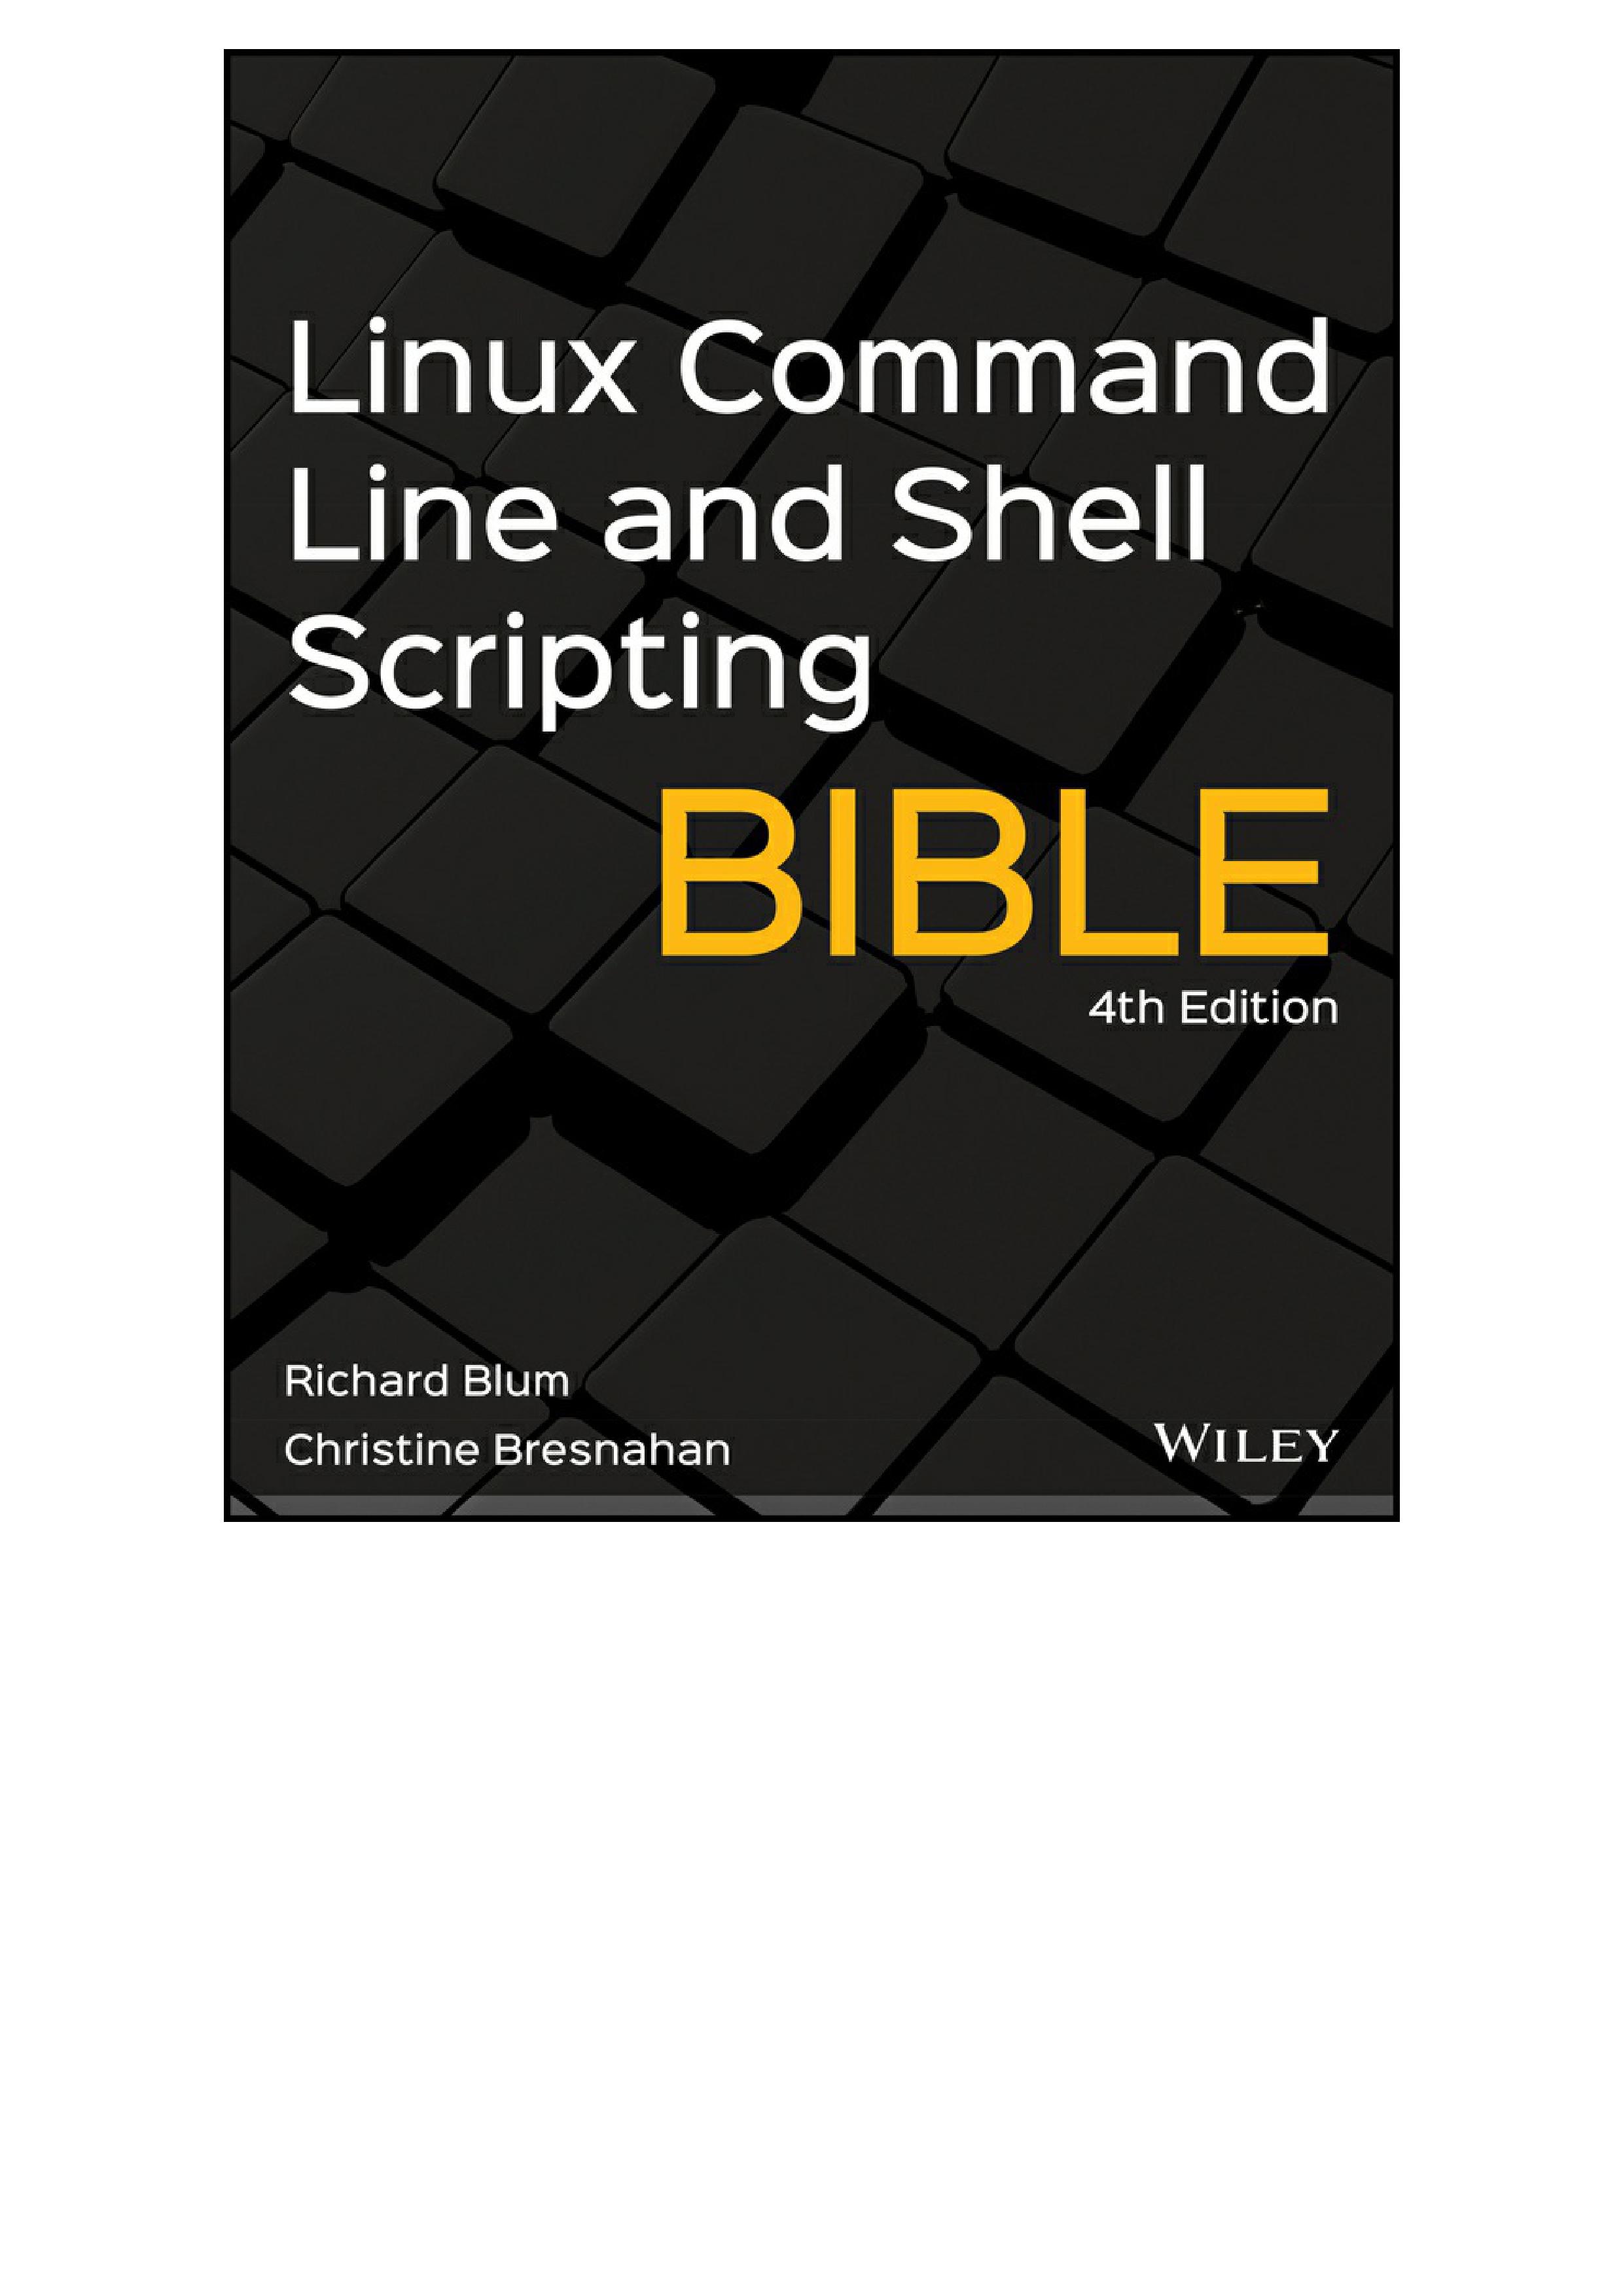 Thumbnail of book Blum R. Linux Command Line and Shell Scripting Bible 4ed 2021.pdf cover